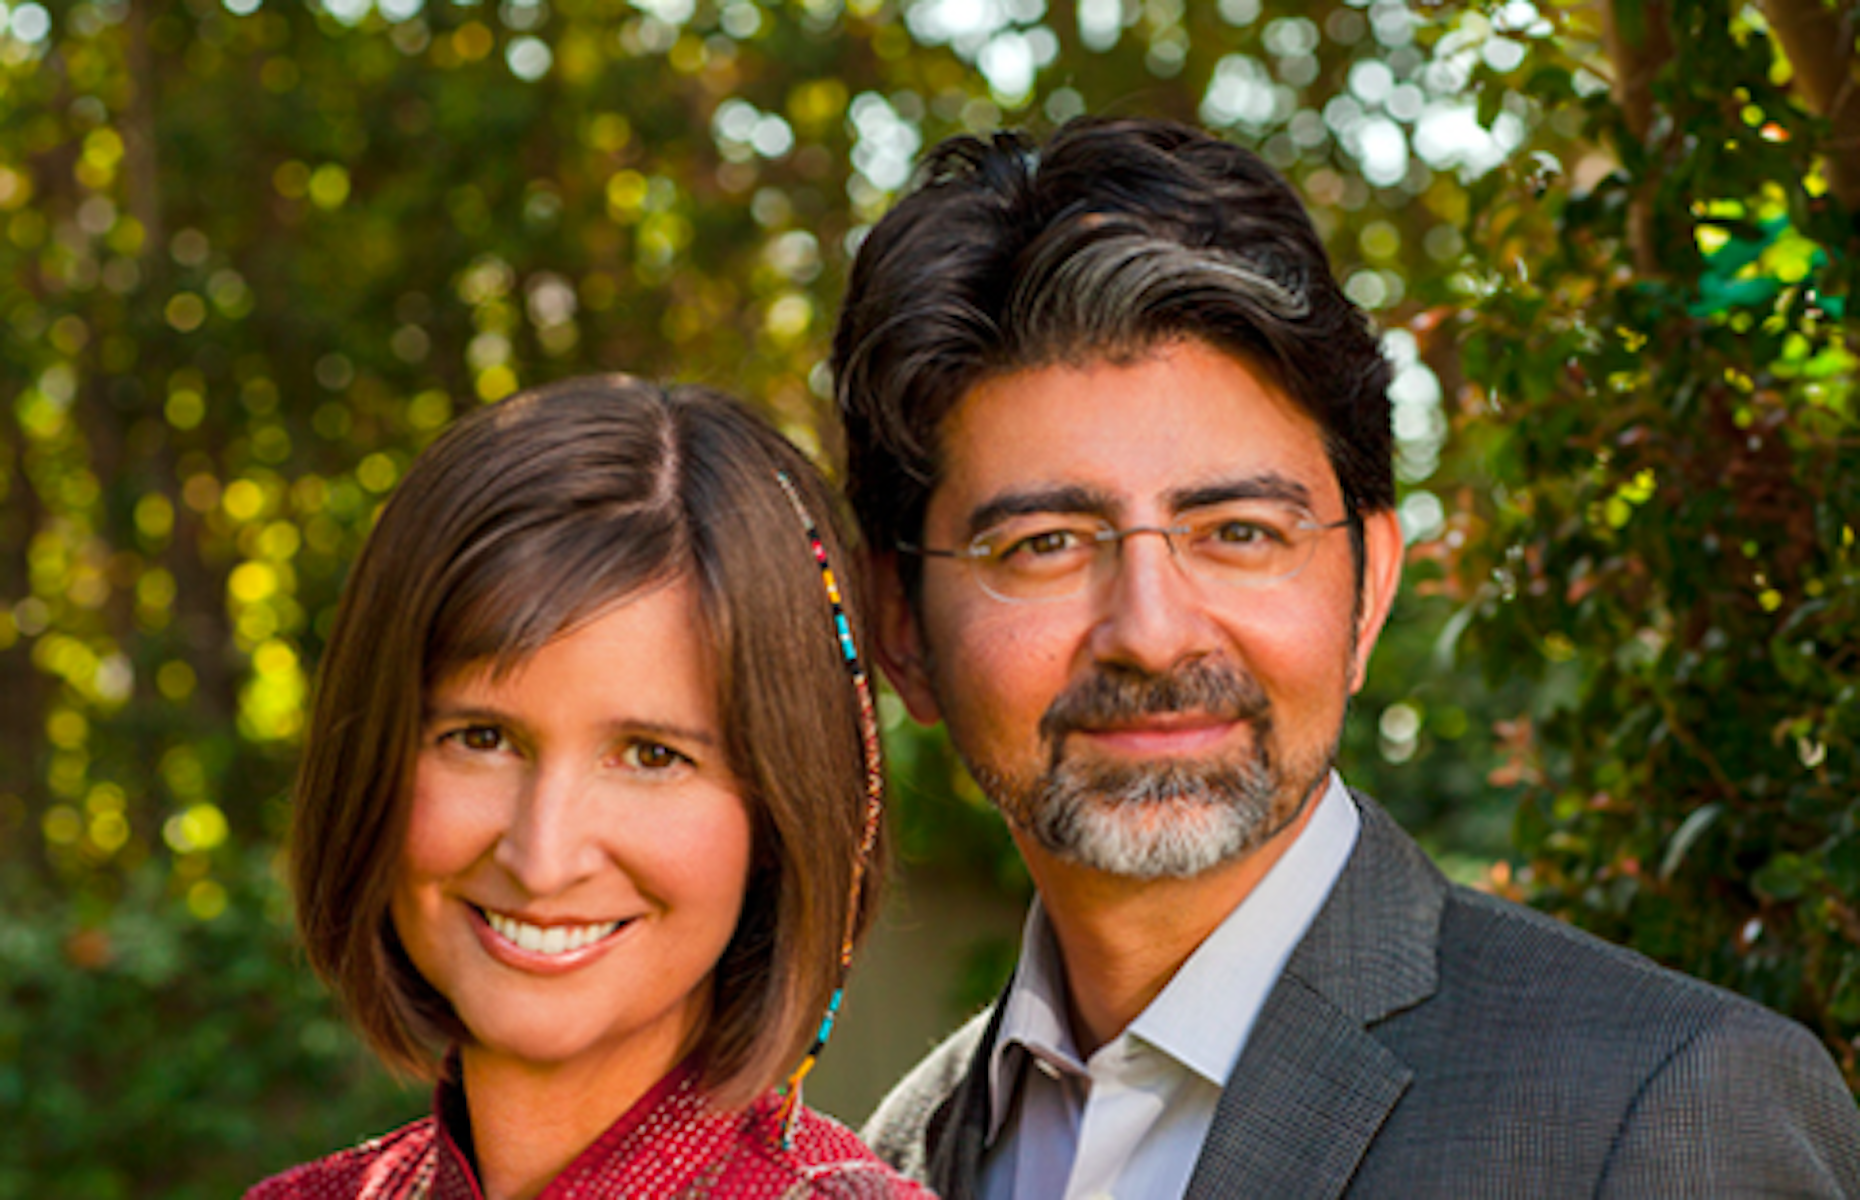 Pierre and Pam Omidyar